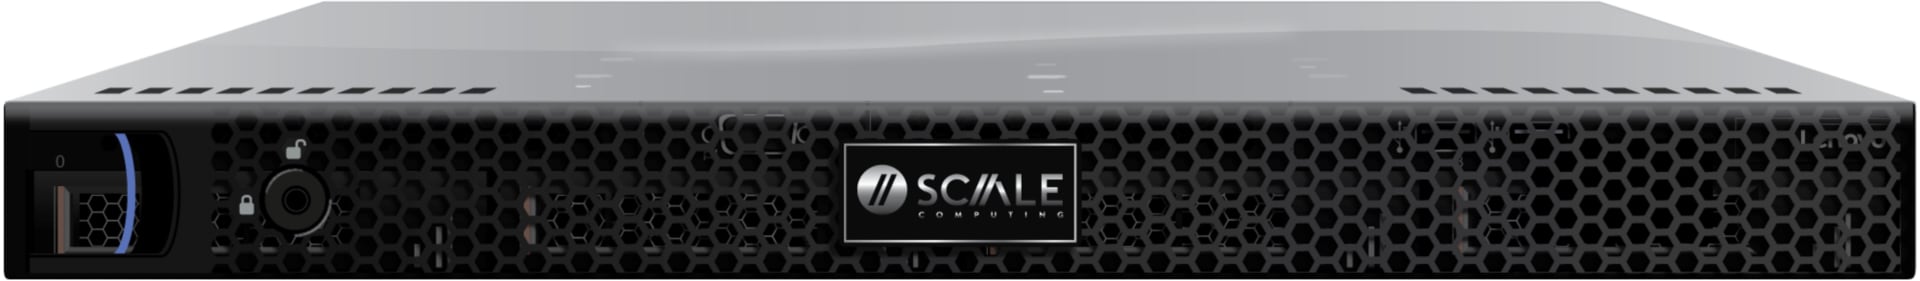 Scale Computing HC1250D Chassis